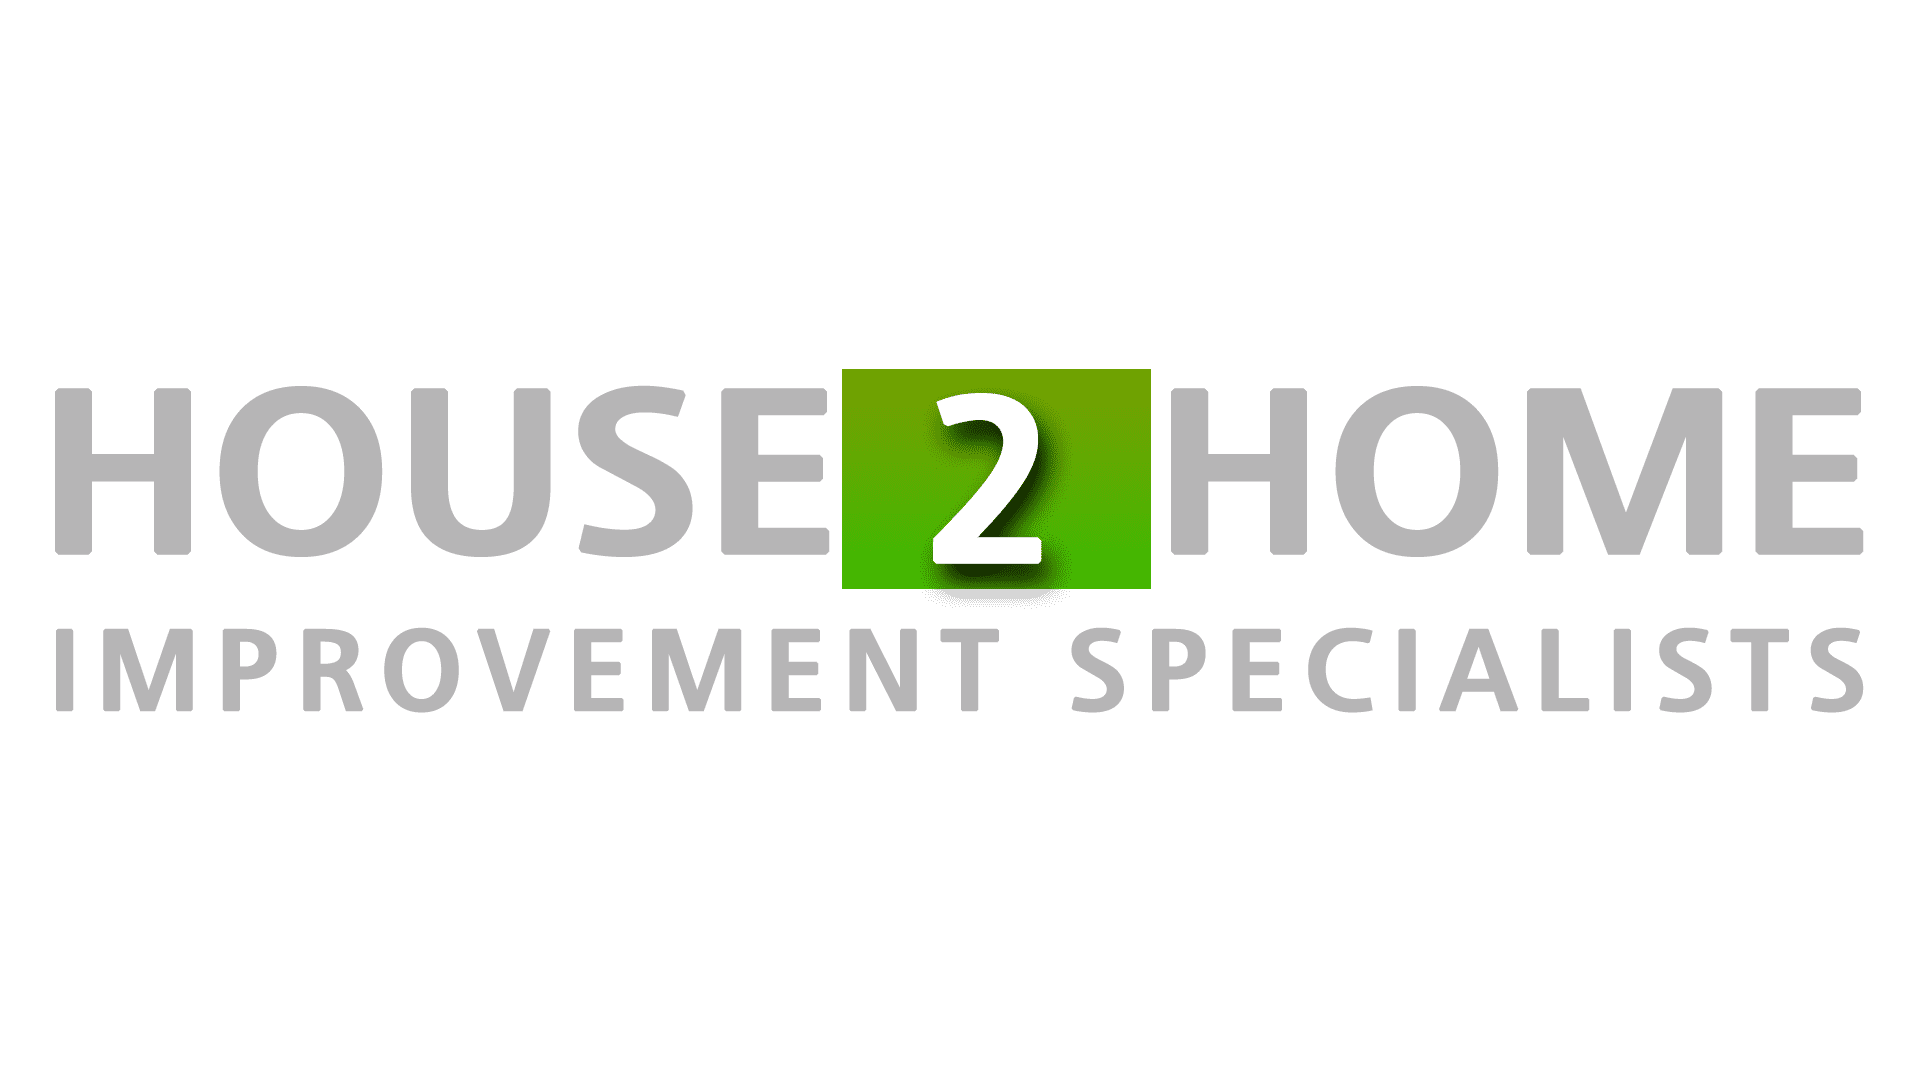 House 2 Home IS Ltd